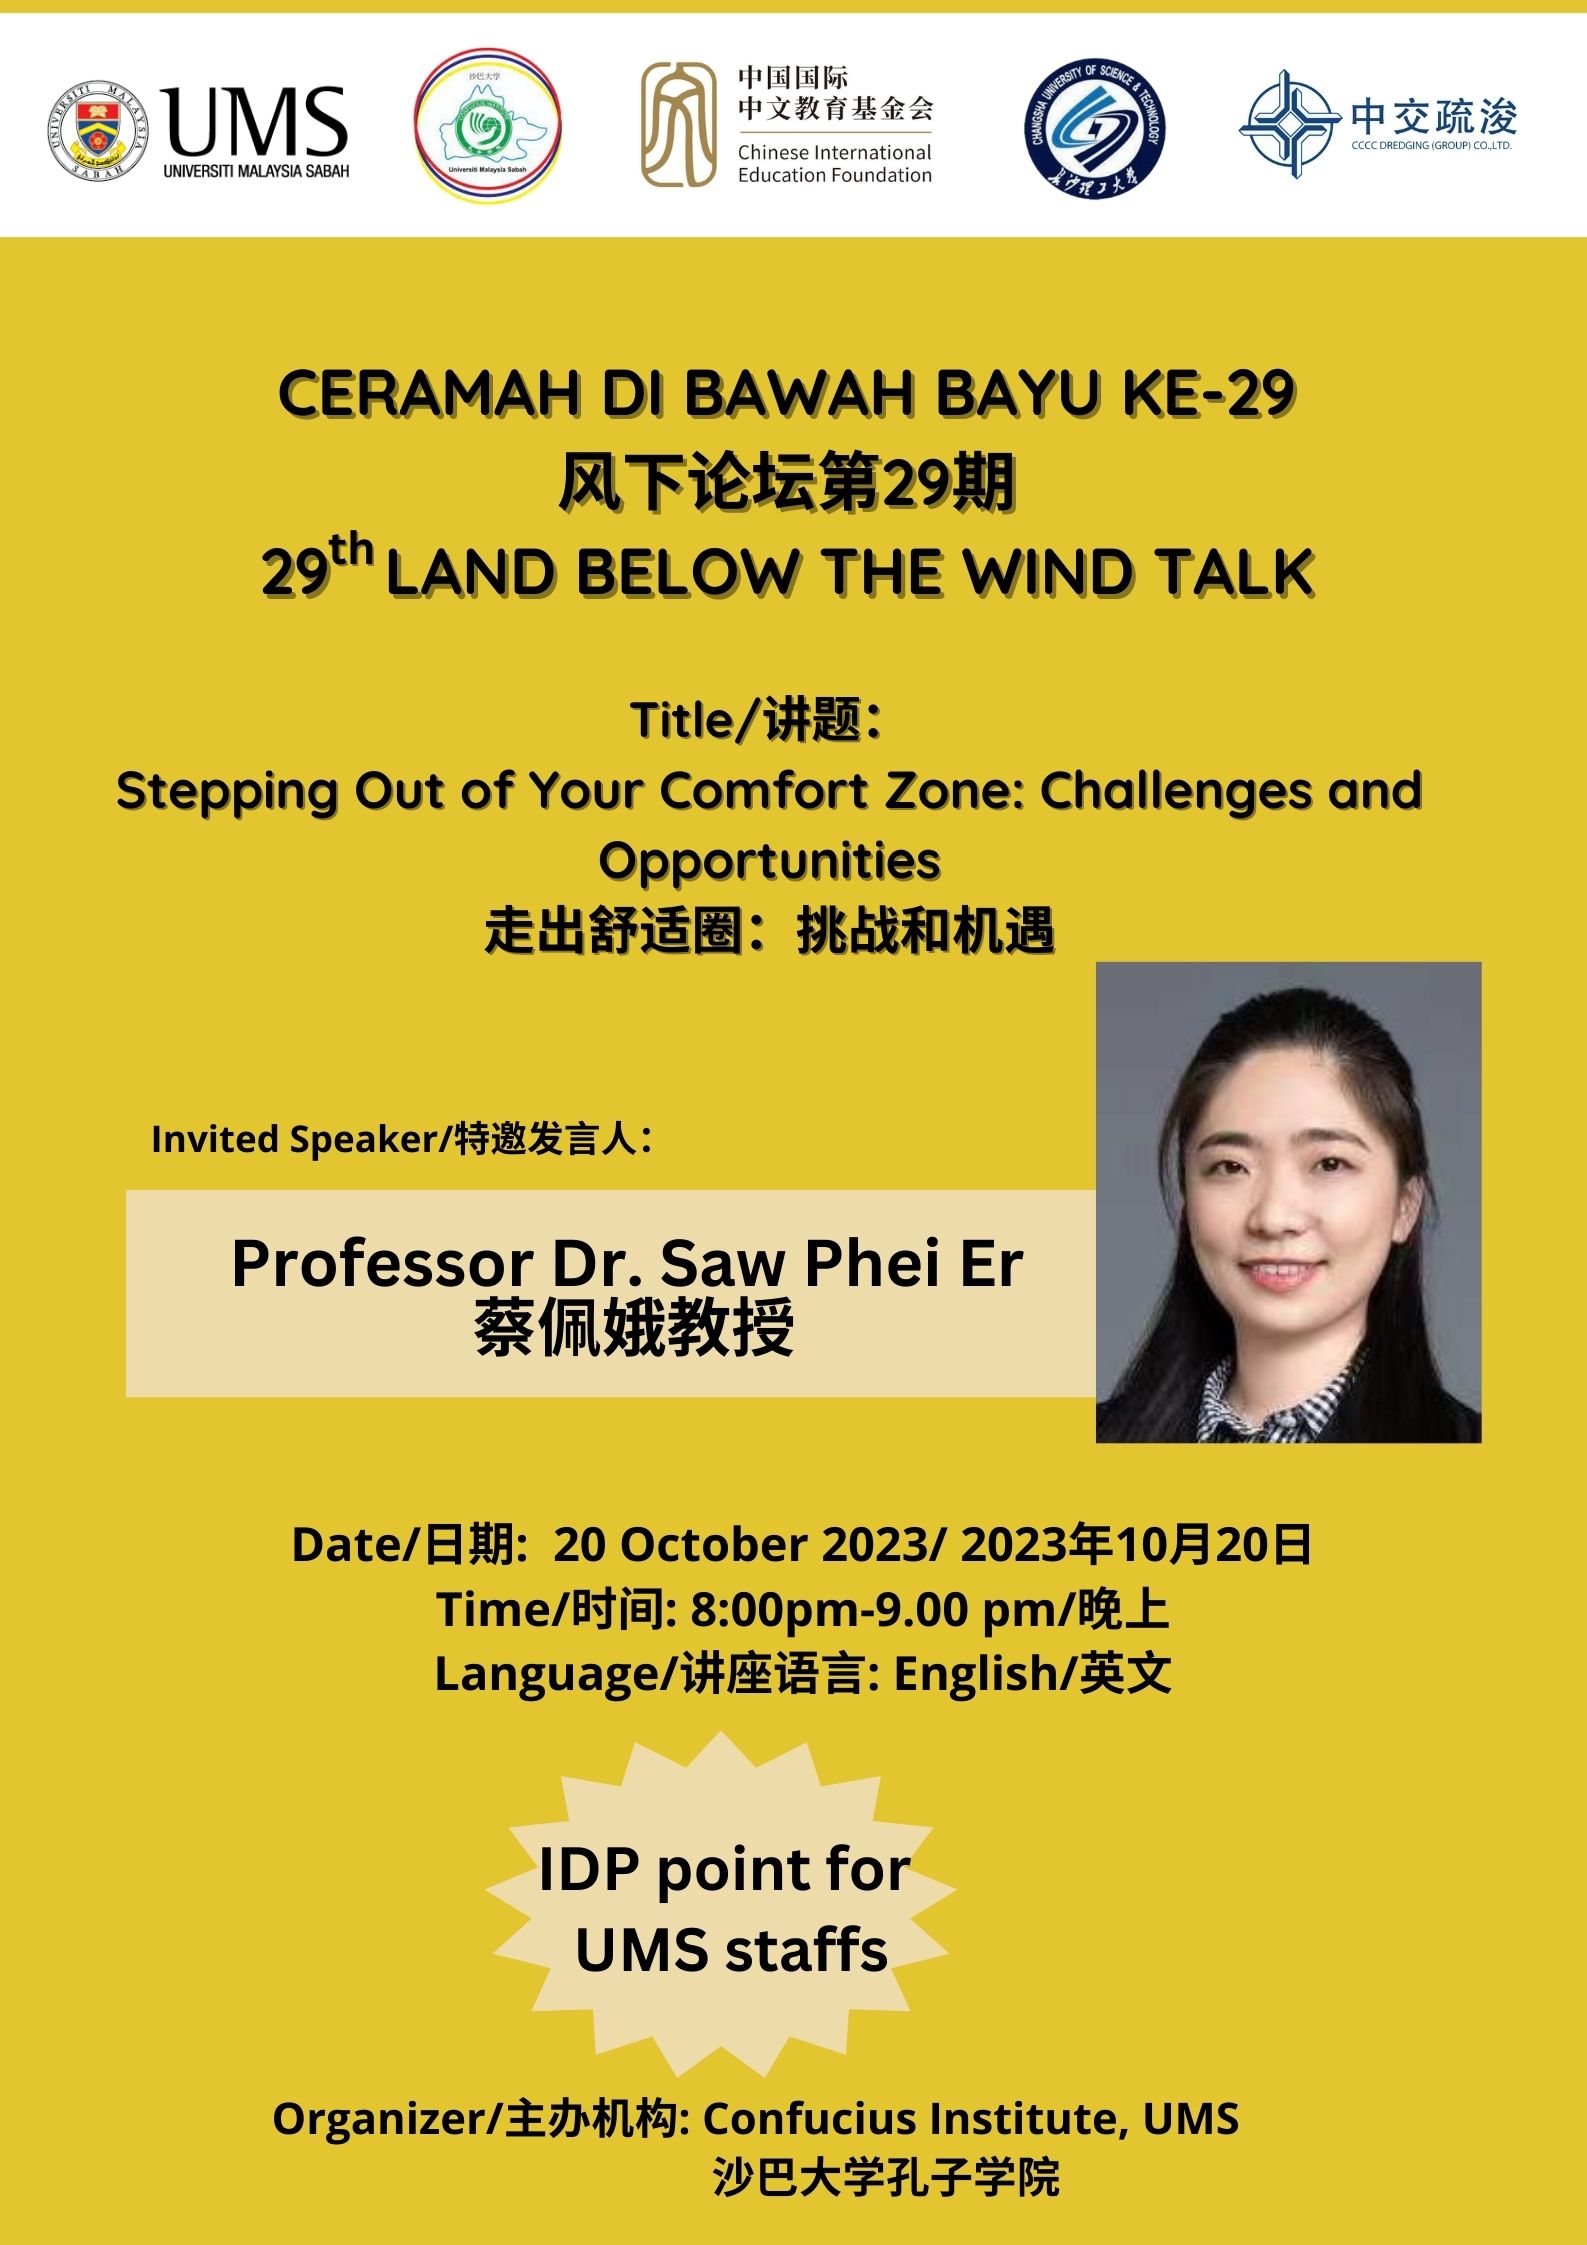 Land Below the Wind Talk 29: Stepping Out of Your Comfort Zone: Challenges and Opportunities